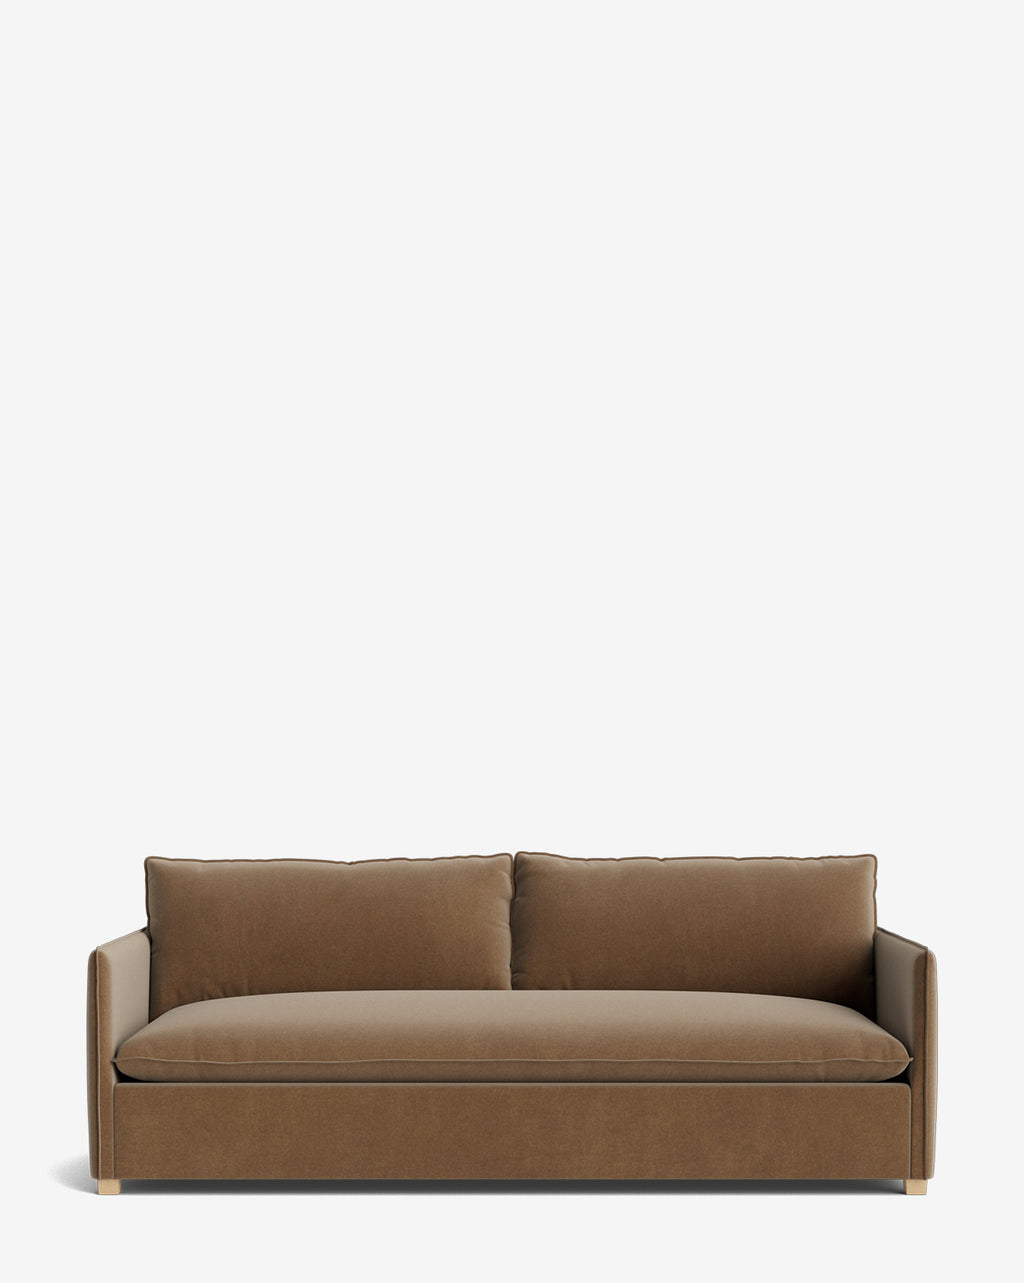 Monclair Upholstered Sofa Mcgee Co